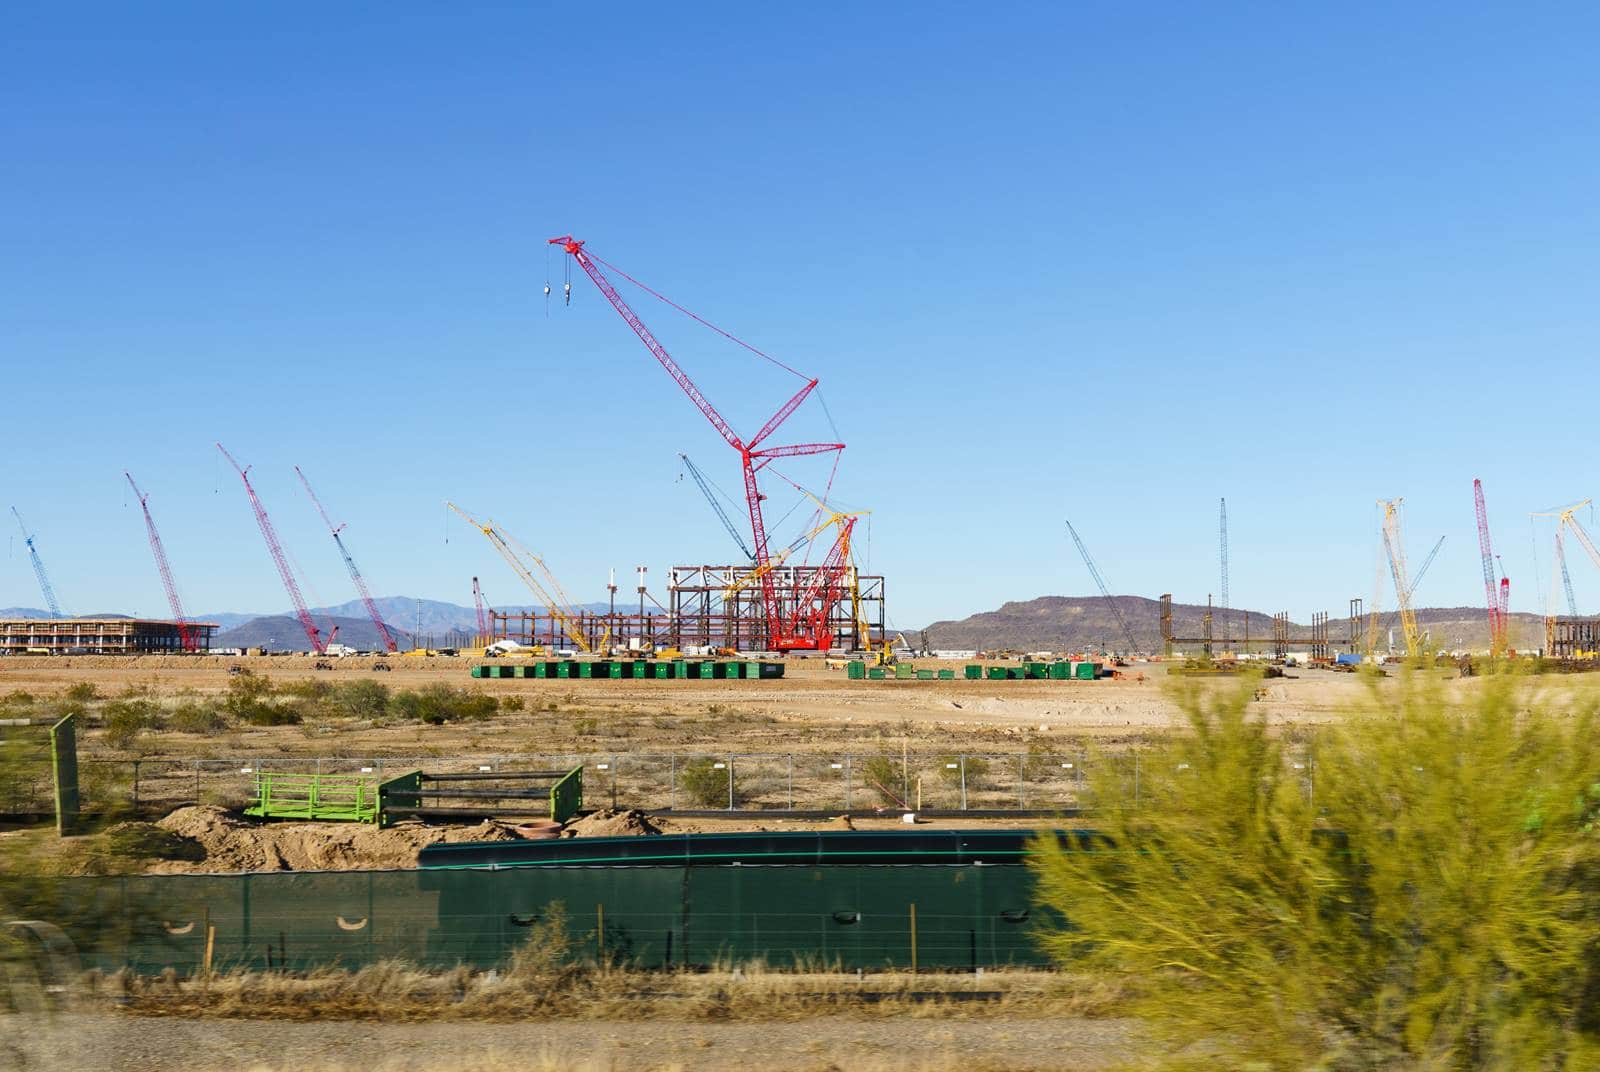 What is TSMC doing building a fab in the American desert?